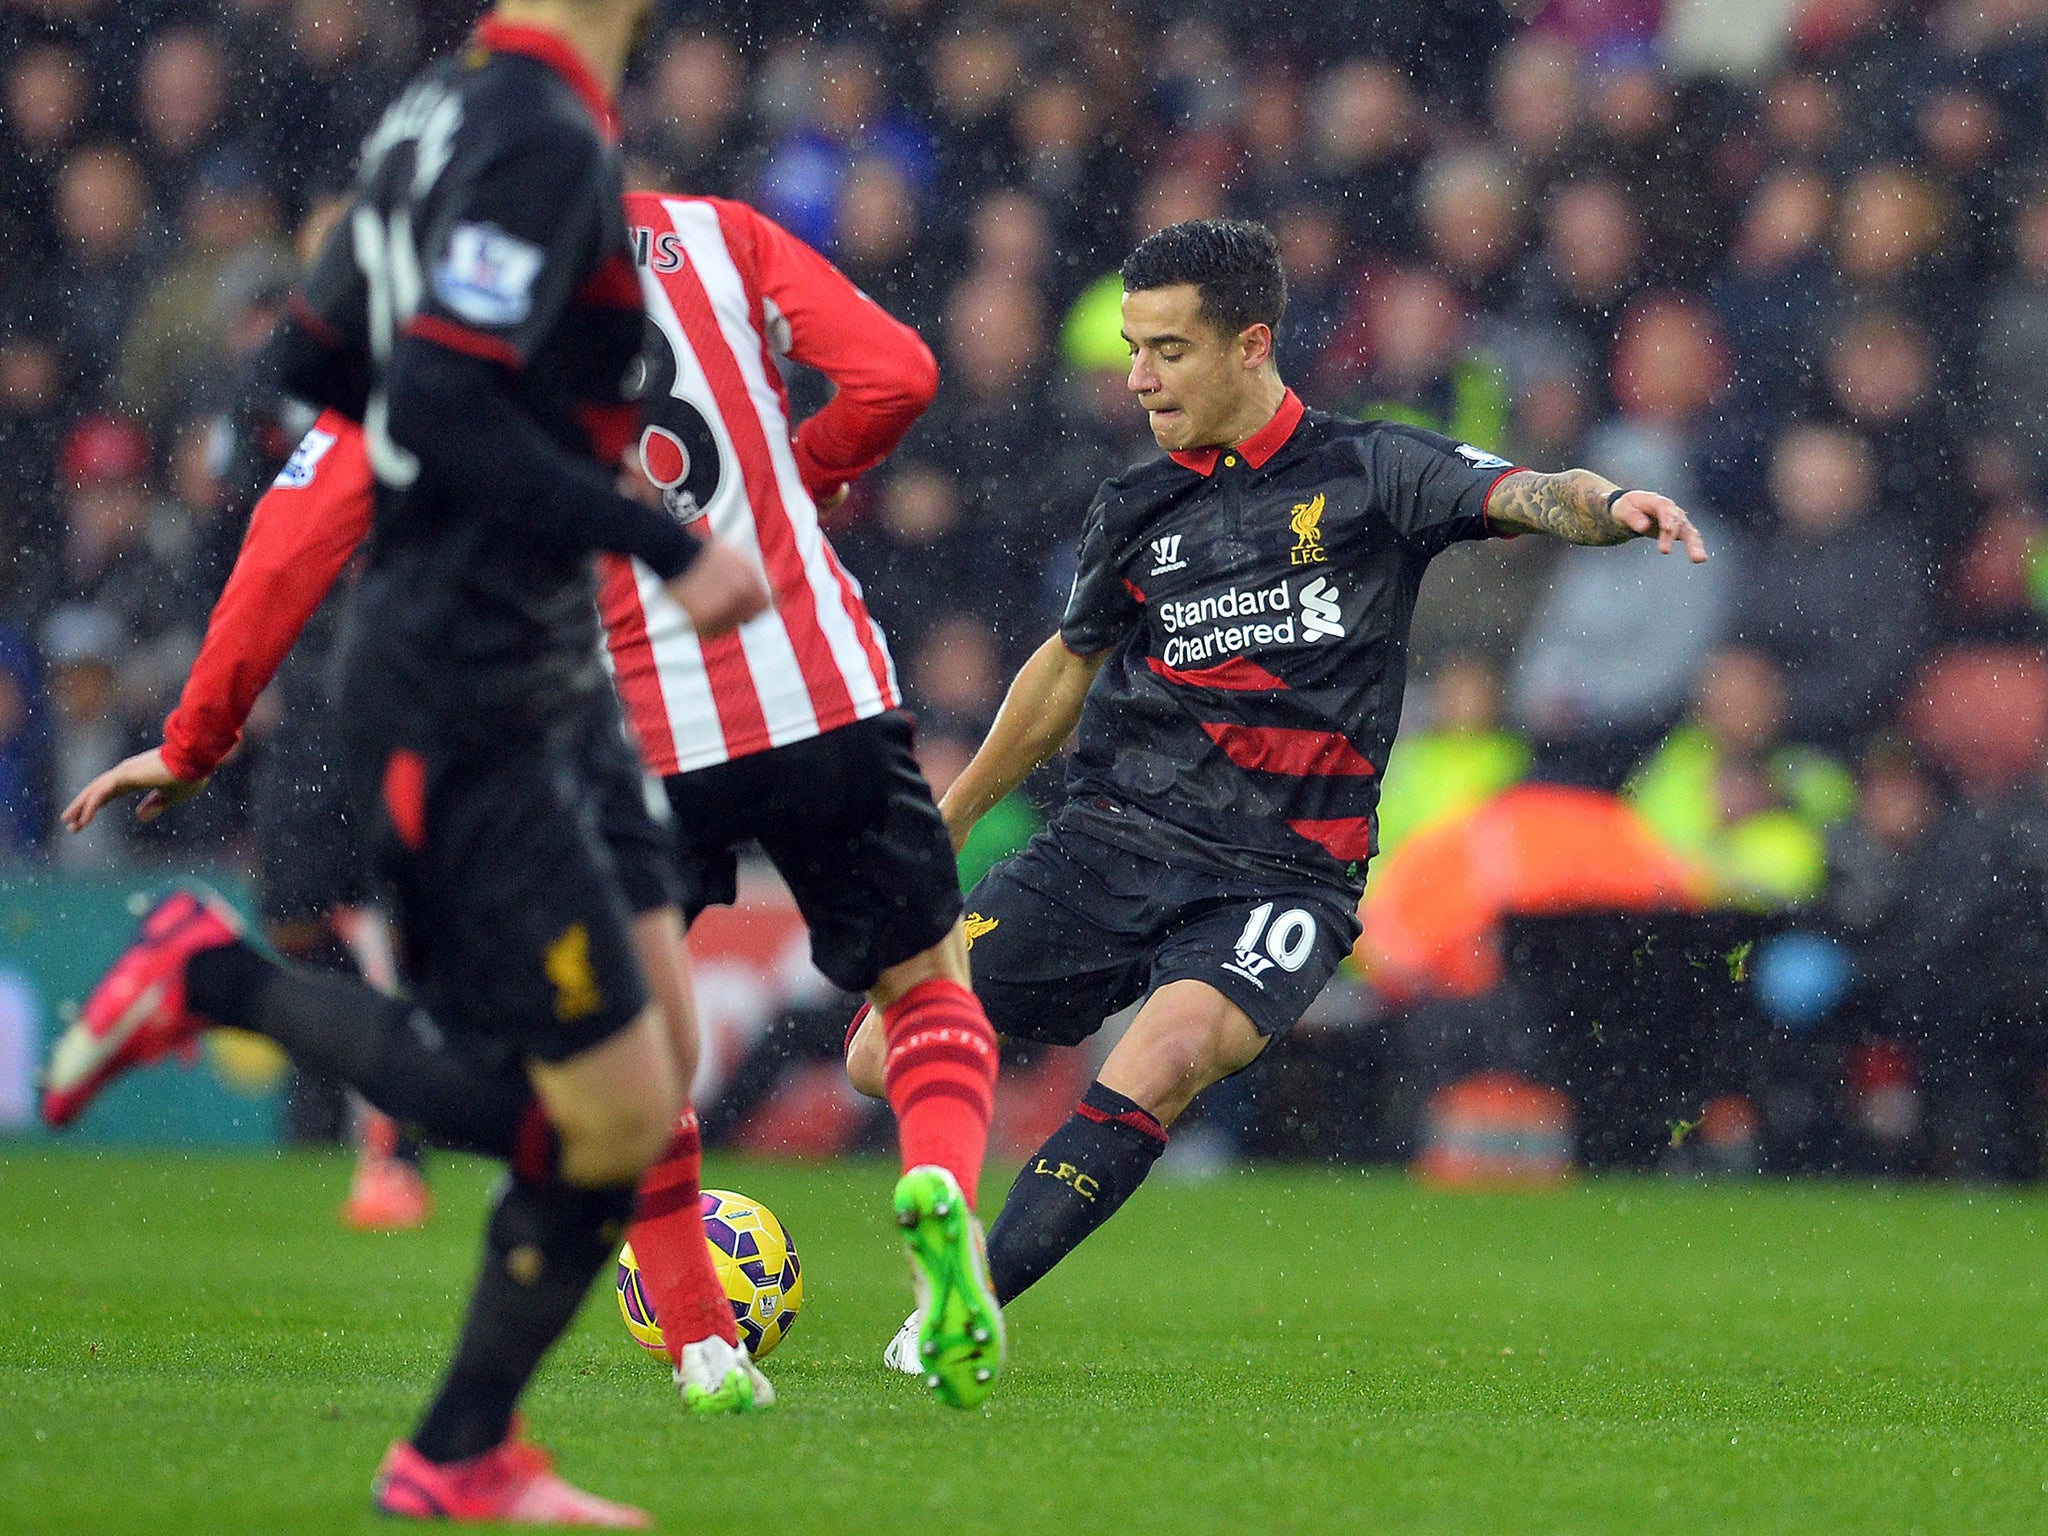 Liverpool's Brazilian midfielder Philippe Coutinho strikes the opening goal against Southampton